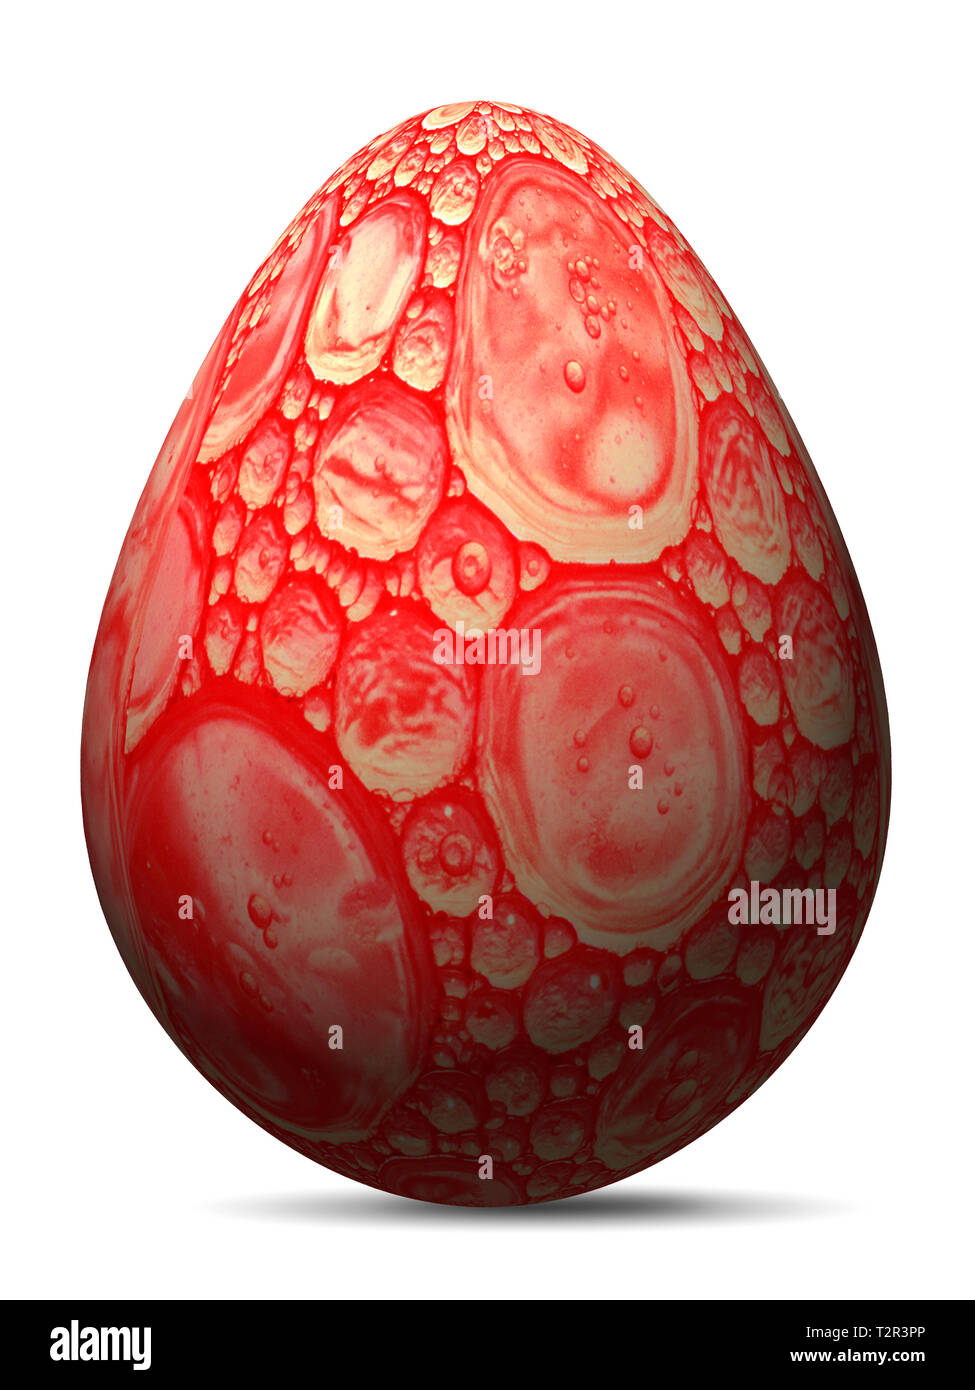 Colorful ingenious red painted egg with watercolor imitation, 3D render isolated on white background Stock Photo